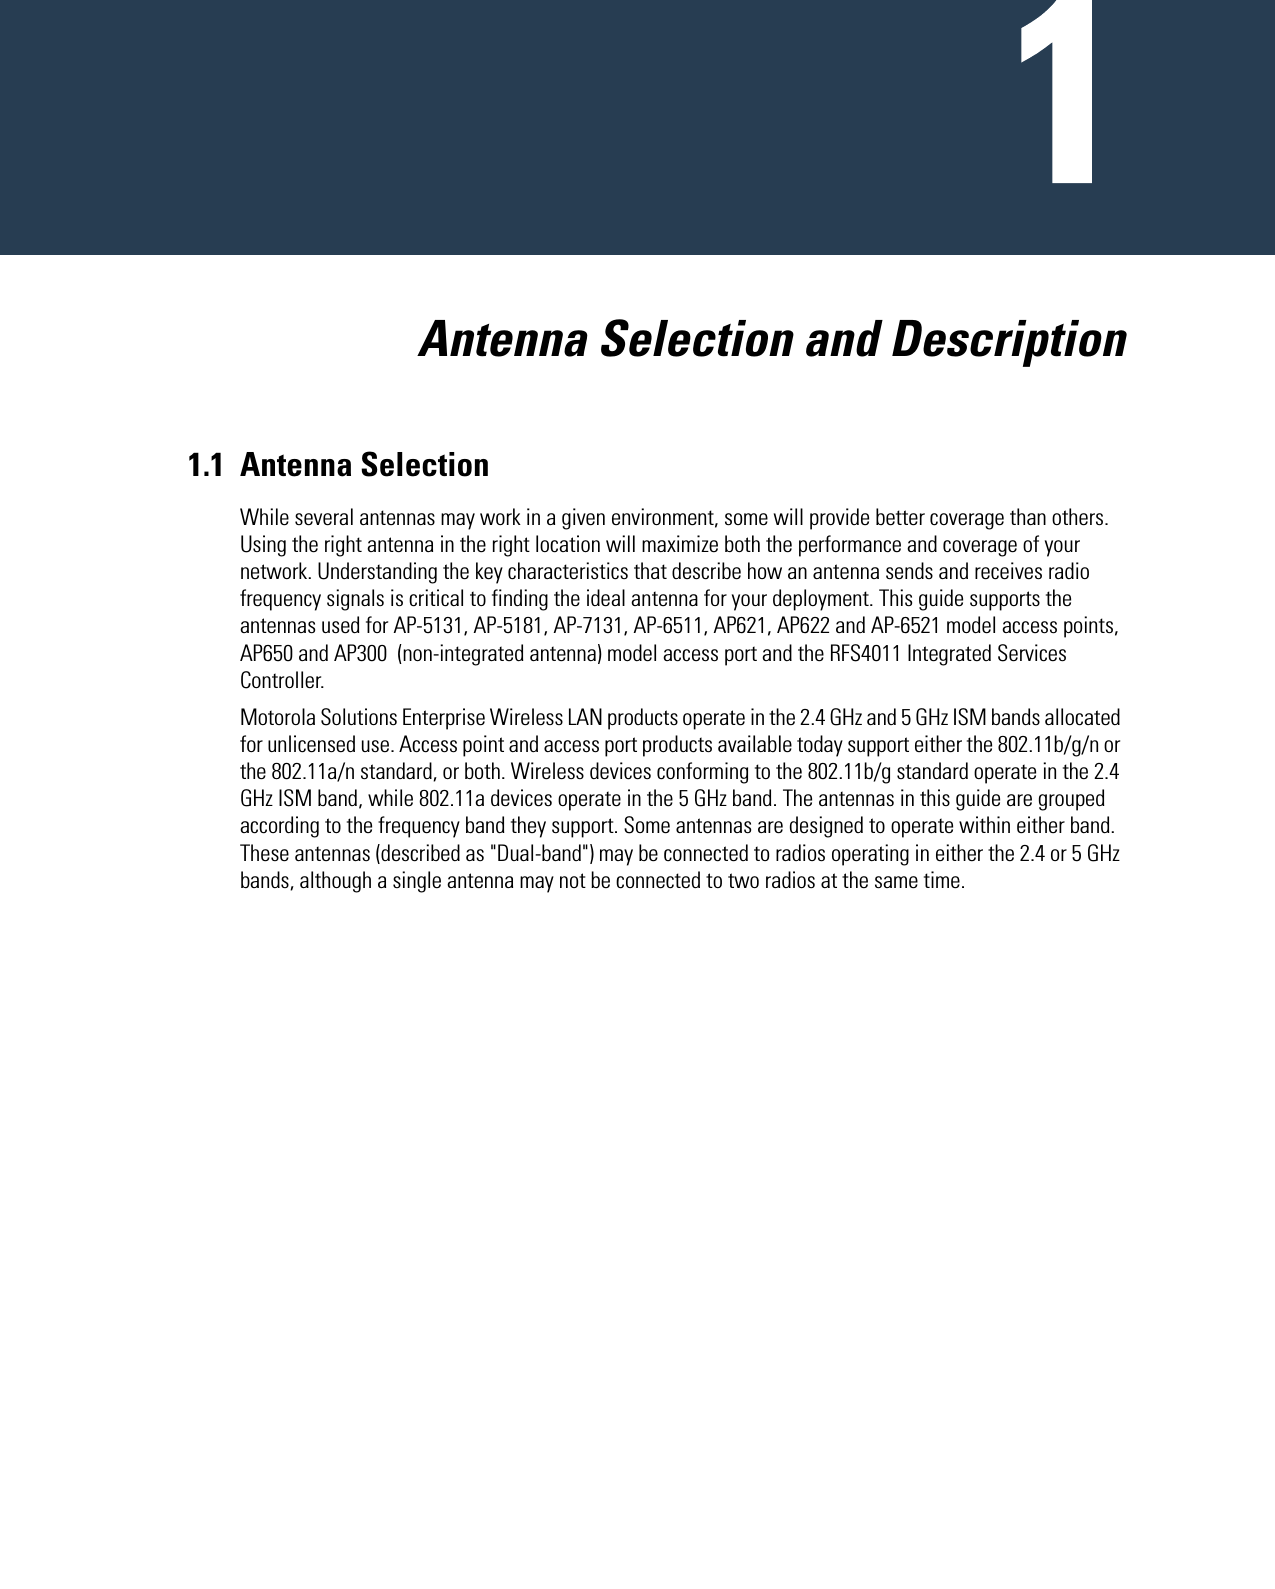   Antenna Selection and Description1.1 Antenna SelectionWhile several antennas may work in a given environment, some will provide better coverage than others. Using the right antenna in the right location will maximize both the performance and coverage of your network. Understanding the key characteristics that describe how an antenna sends and receives radio frequency signals is critical to finding the ideal antenna for your deployment. This guide supports the antennas used for AP-5131, AP-5181, AP-7131, AP-6511, AP621, AP622 and AP-6521 model access points, AP650 and AP300  (non-integrated antenna) model access port and the RFS4011 Integrated Services Controller.Motorola Solutions Enterprise Wireless LAN products operate in the 2.4 GHz and 5 GHz ISM bands allocated for unlicensed use. Access point and access port products available today support either the 802.11b/g/n or the 802.11a/n standard, or both. Wireless devices conforming to the 802.11b/g standard operate in the 2.4 GHz ISM band, while 802.11a devices operate in the 5 GHz band. The antennas in this guide are grouped according to the frequency band they support. Some antennas are designed to operate within either band. These antennas (described as &quot;Dual-band&quot;) may be connected to radios operating in either the 2.4 or 5 GHz bands, although a single antenna may not be connected to two radios at the same time.